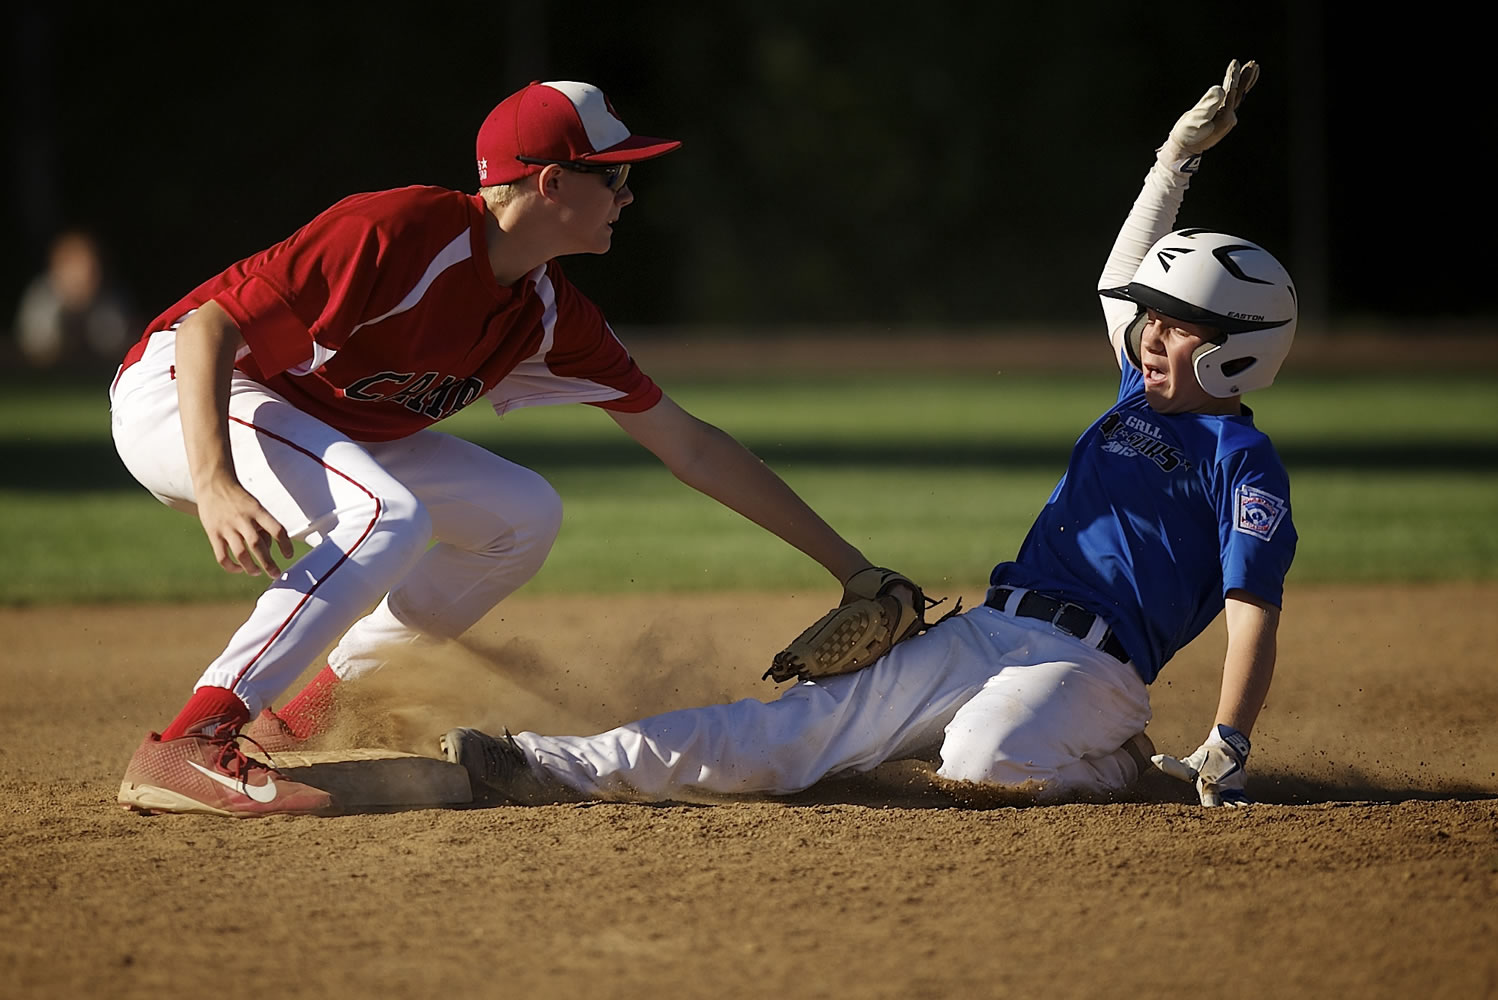 Second baseman Shane Jamison of Camas tags out Mitchell Powers of Greater Richland Little League at second base during the Washington State Little League All-Star tournament at Luke Jensen Sports Park in Vancouver.